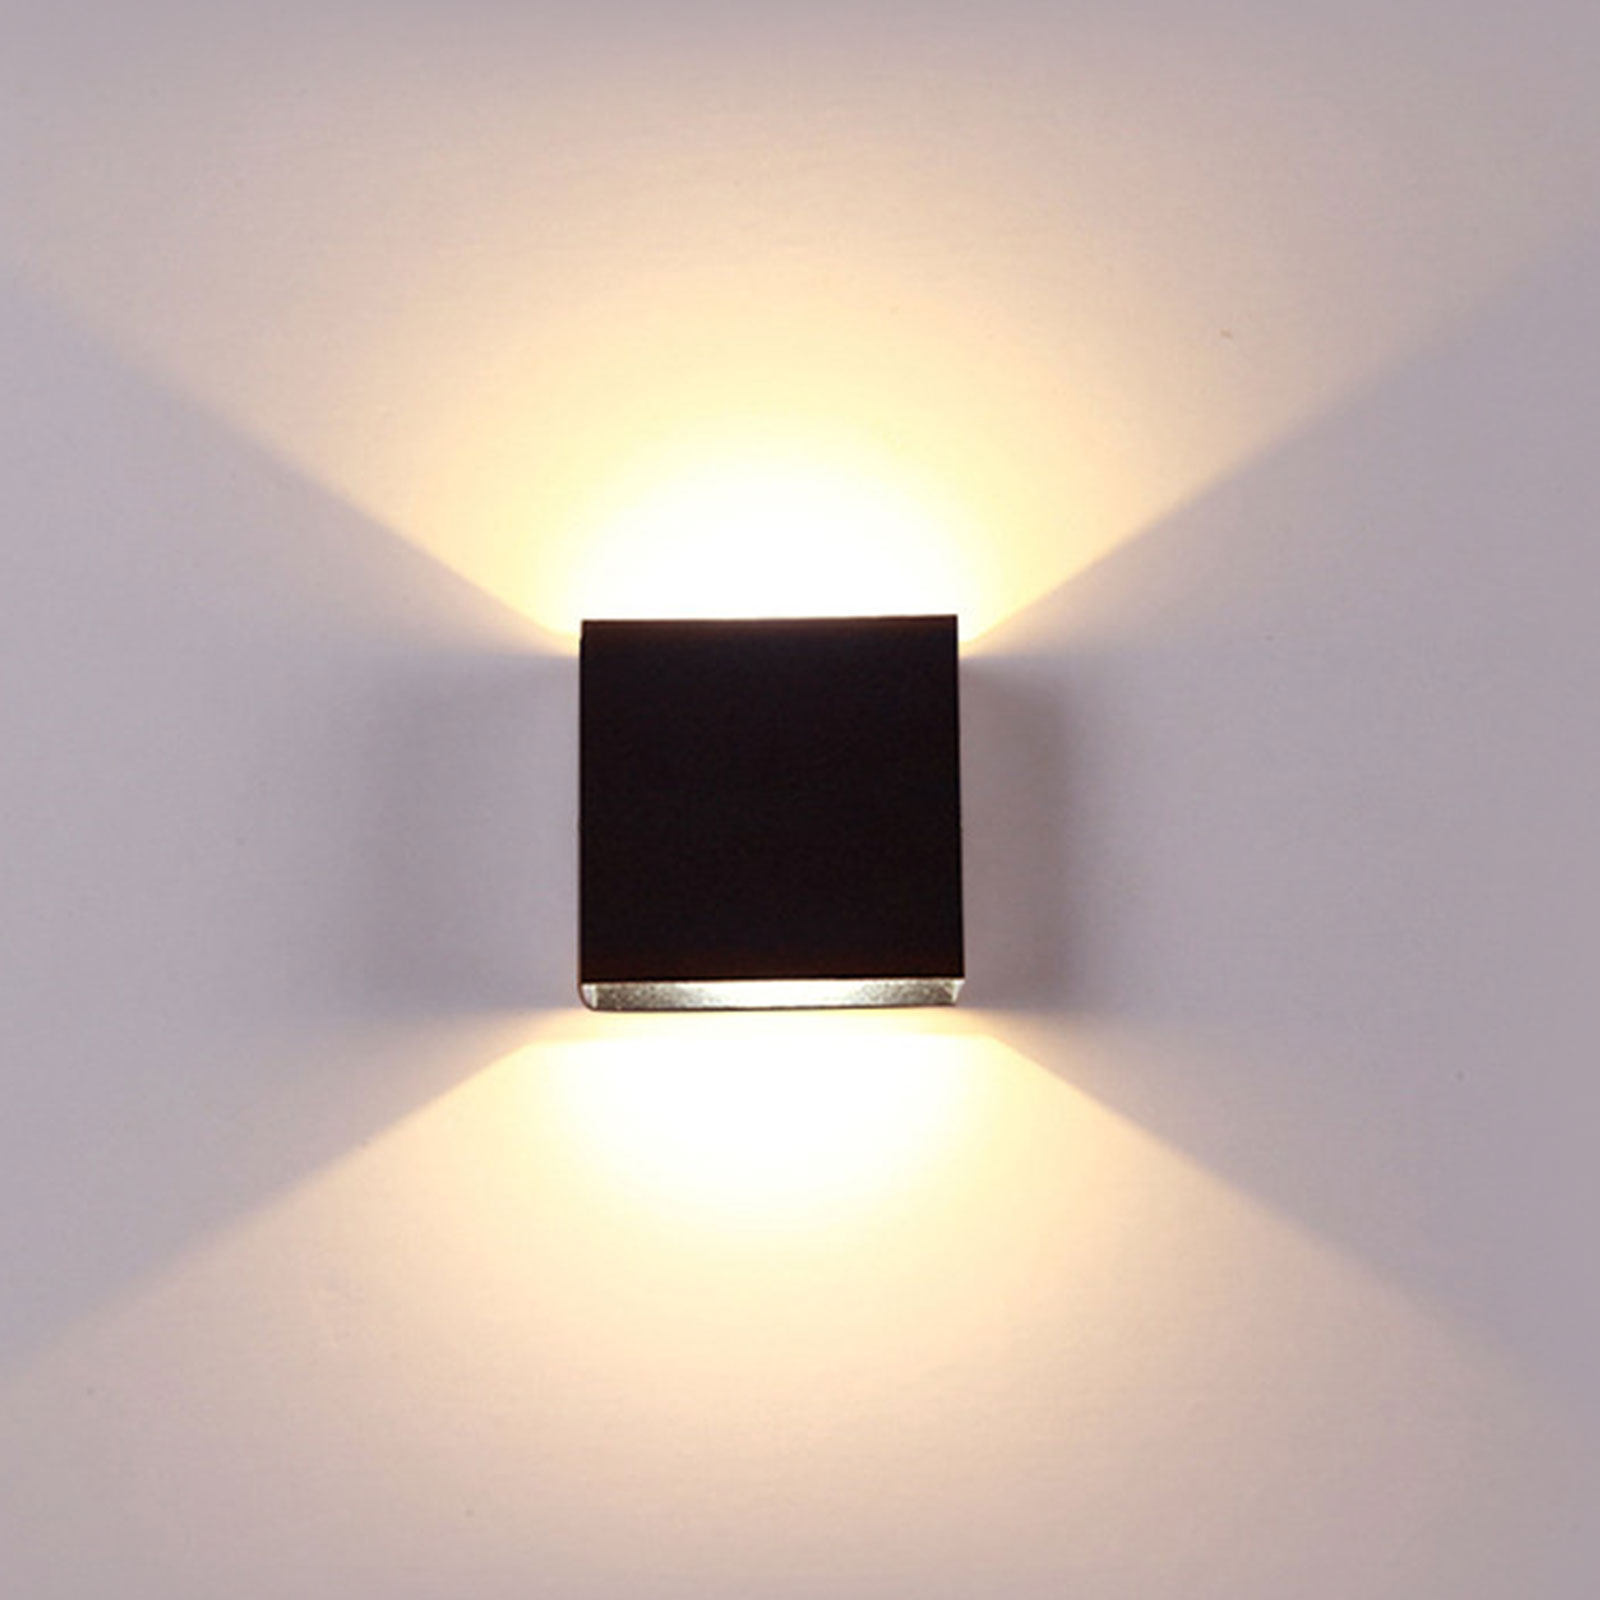 8W Modern COB LED Wall Light Up Down Cube Indoor Outdoor Sconce Lighting Lamp 